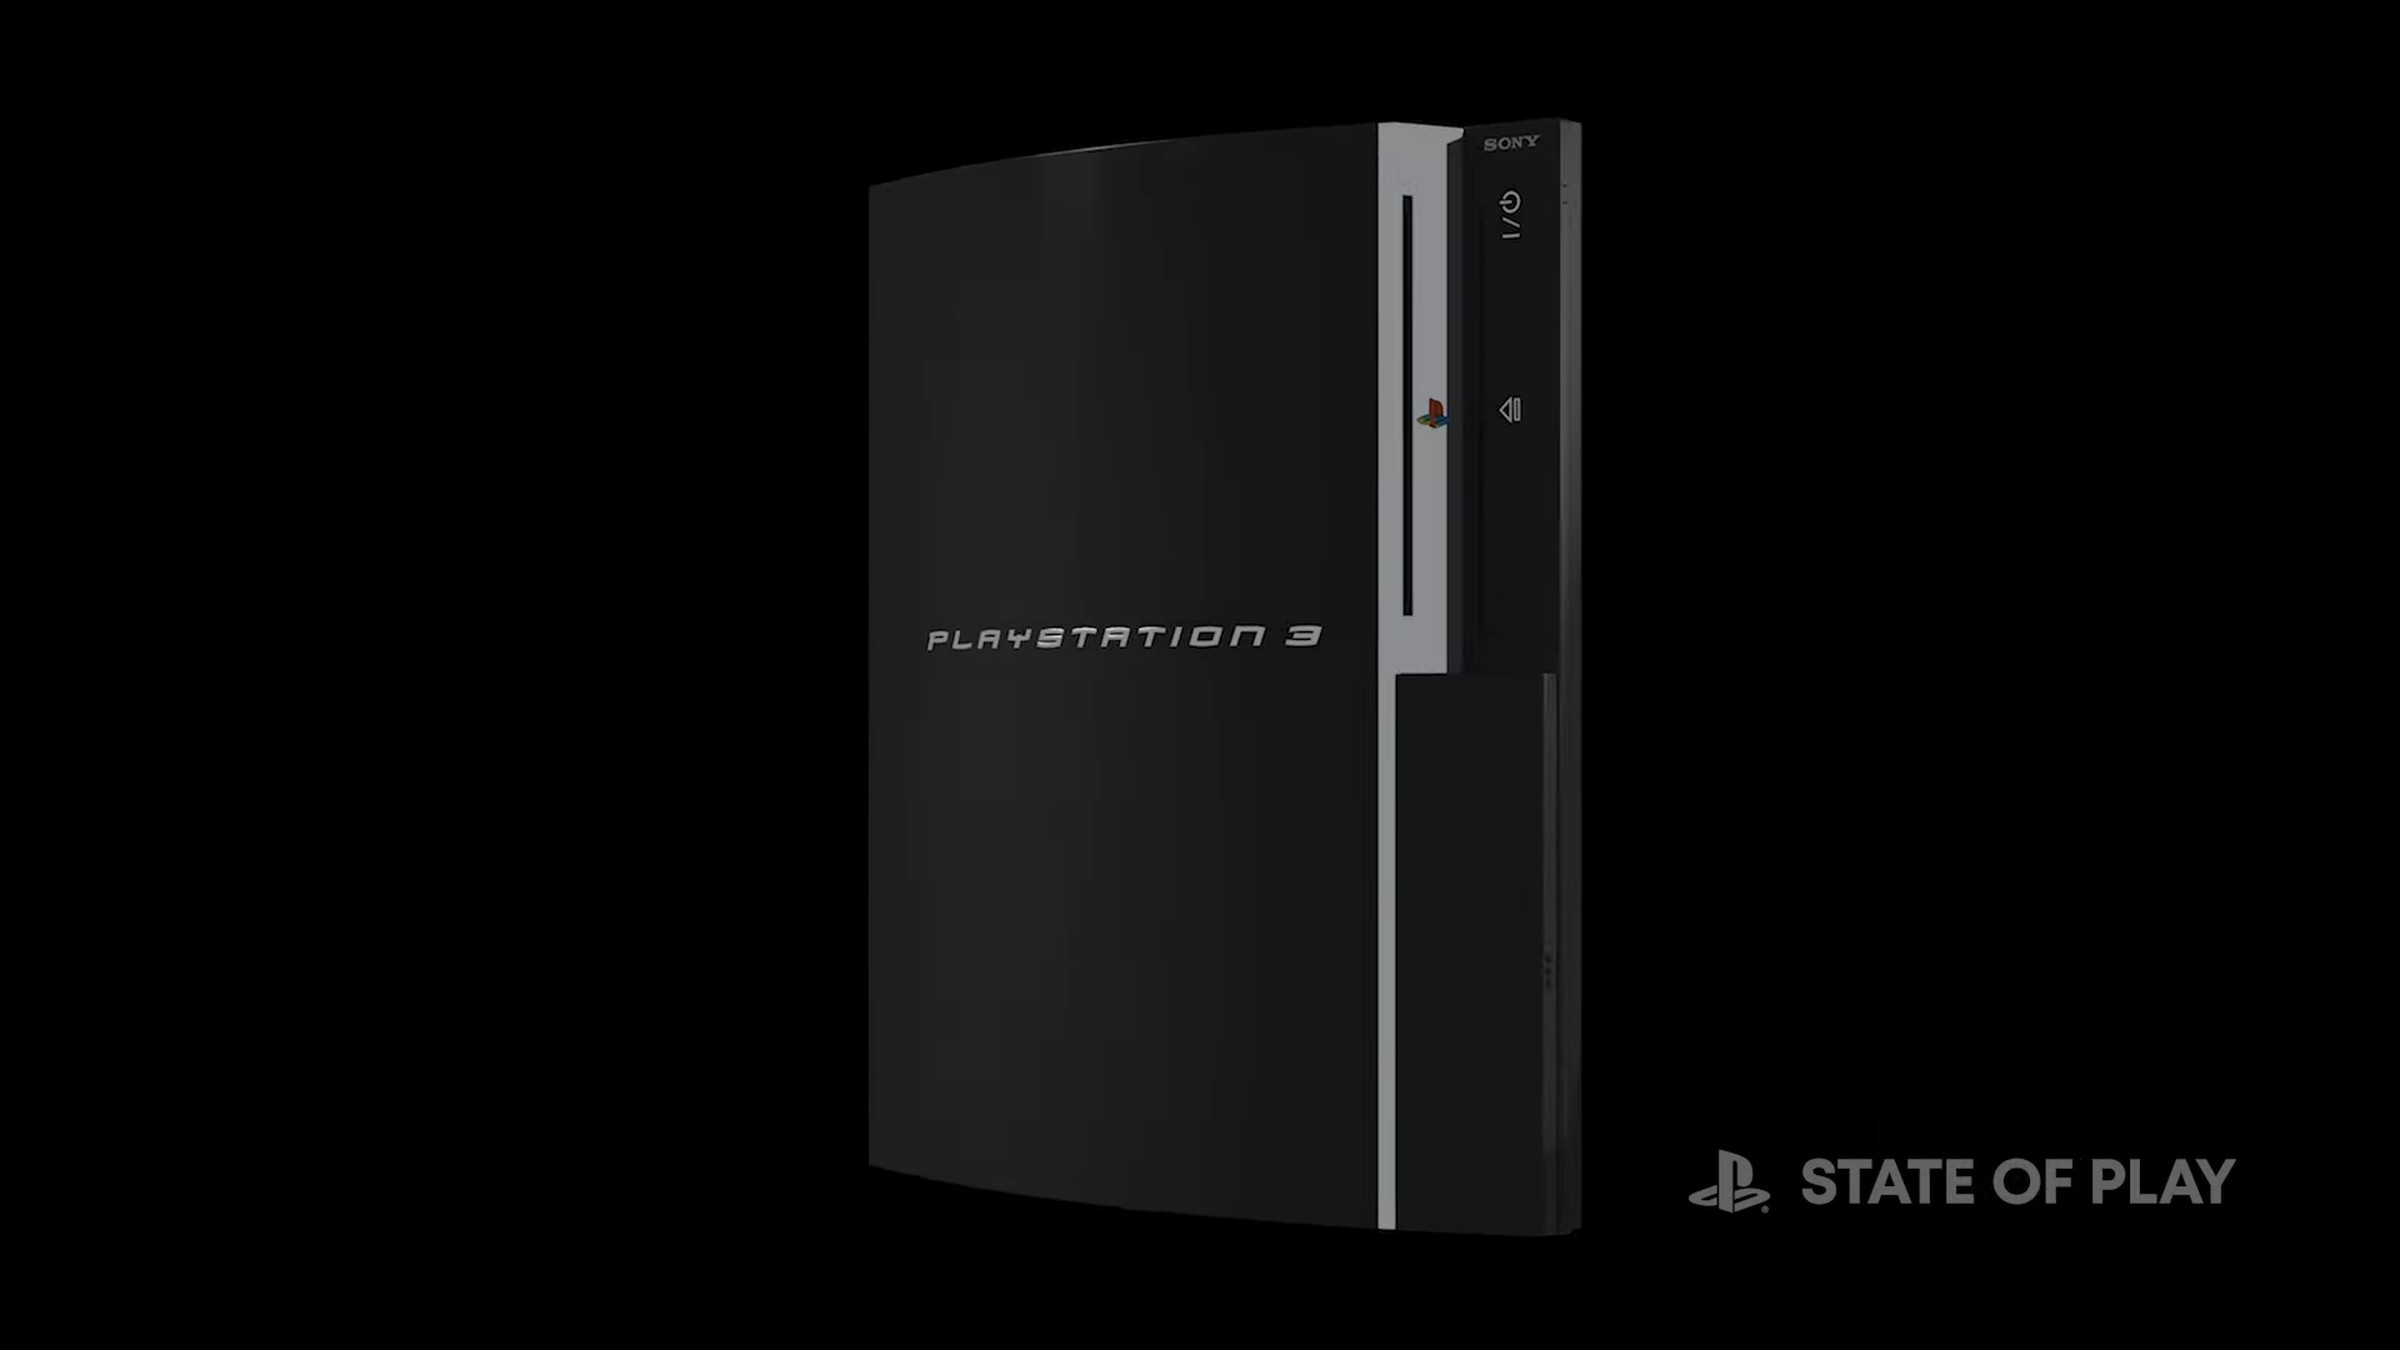 A digital representation of a PS3 is set on a black background.